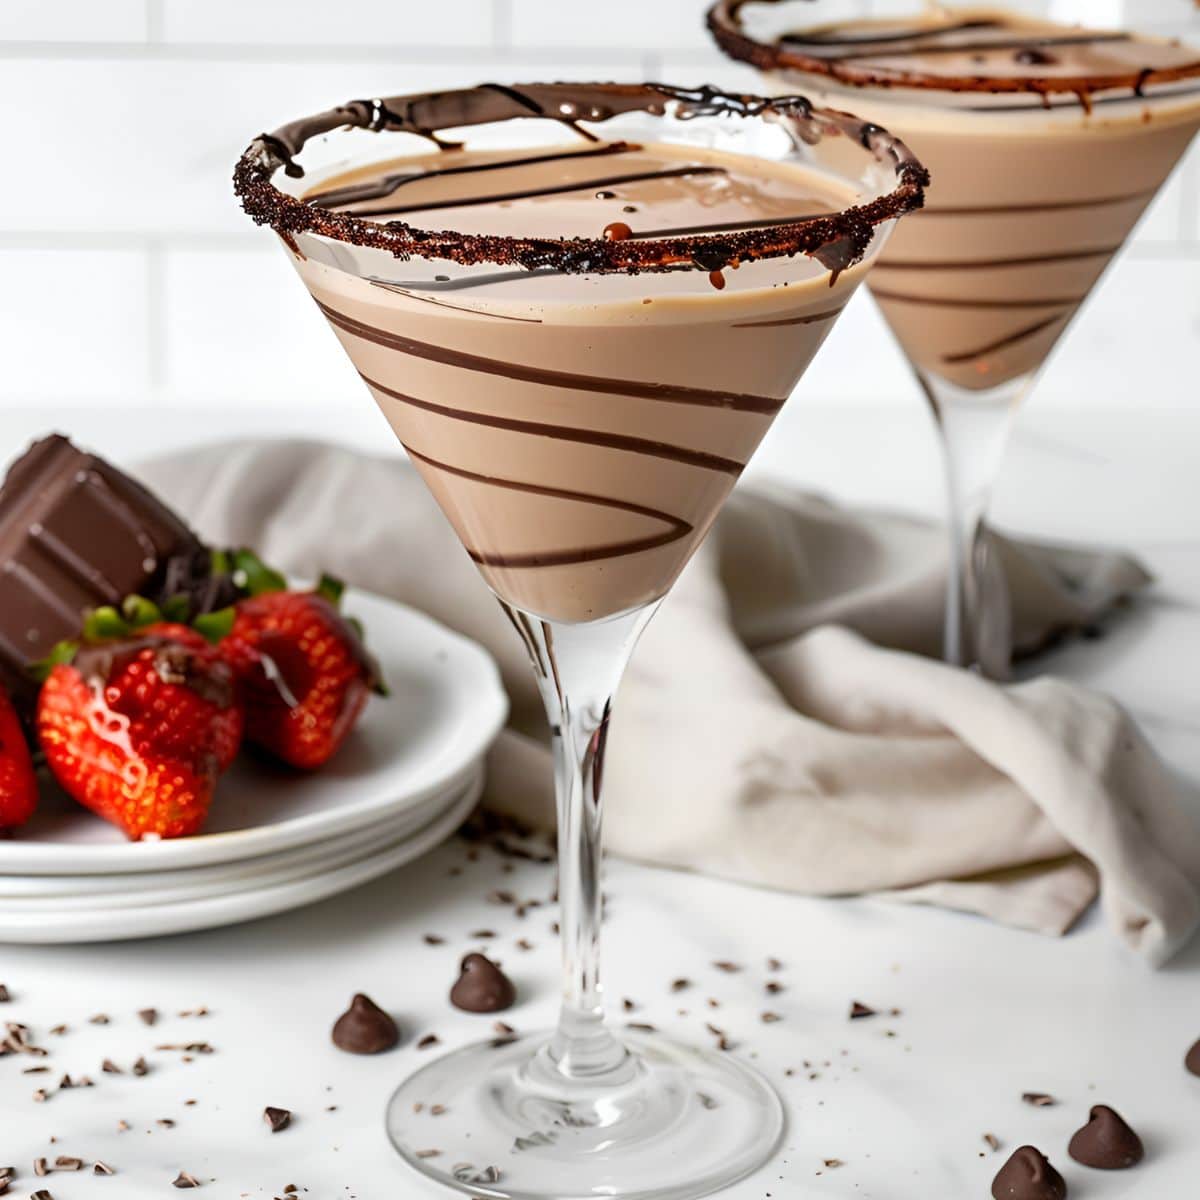 Two Godiva Chocolate Martinis with Chocolate Drizzles, Chocolate Rim, and a Plate of Chocolate and Chocolate-Covered Strawberries